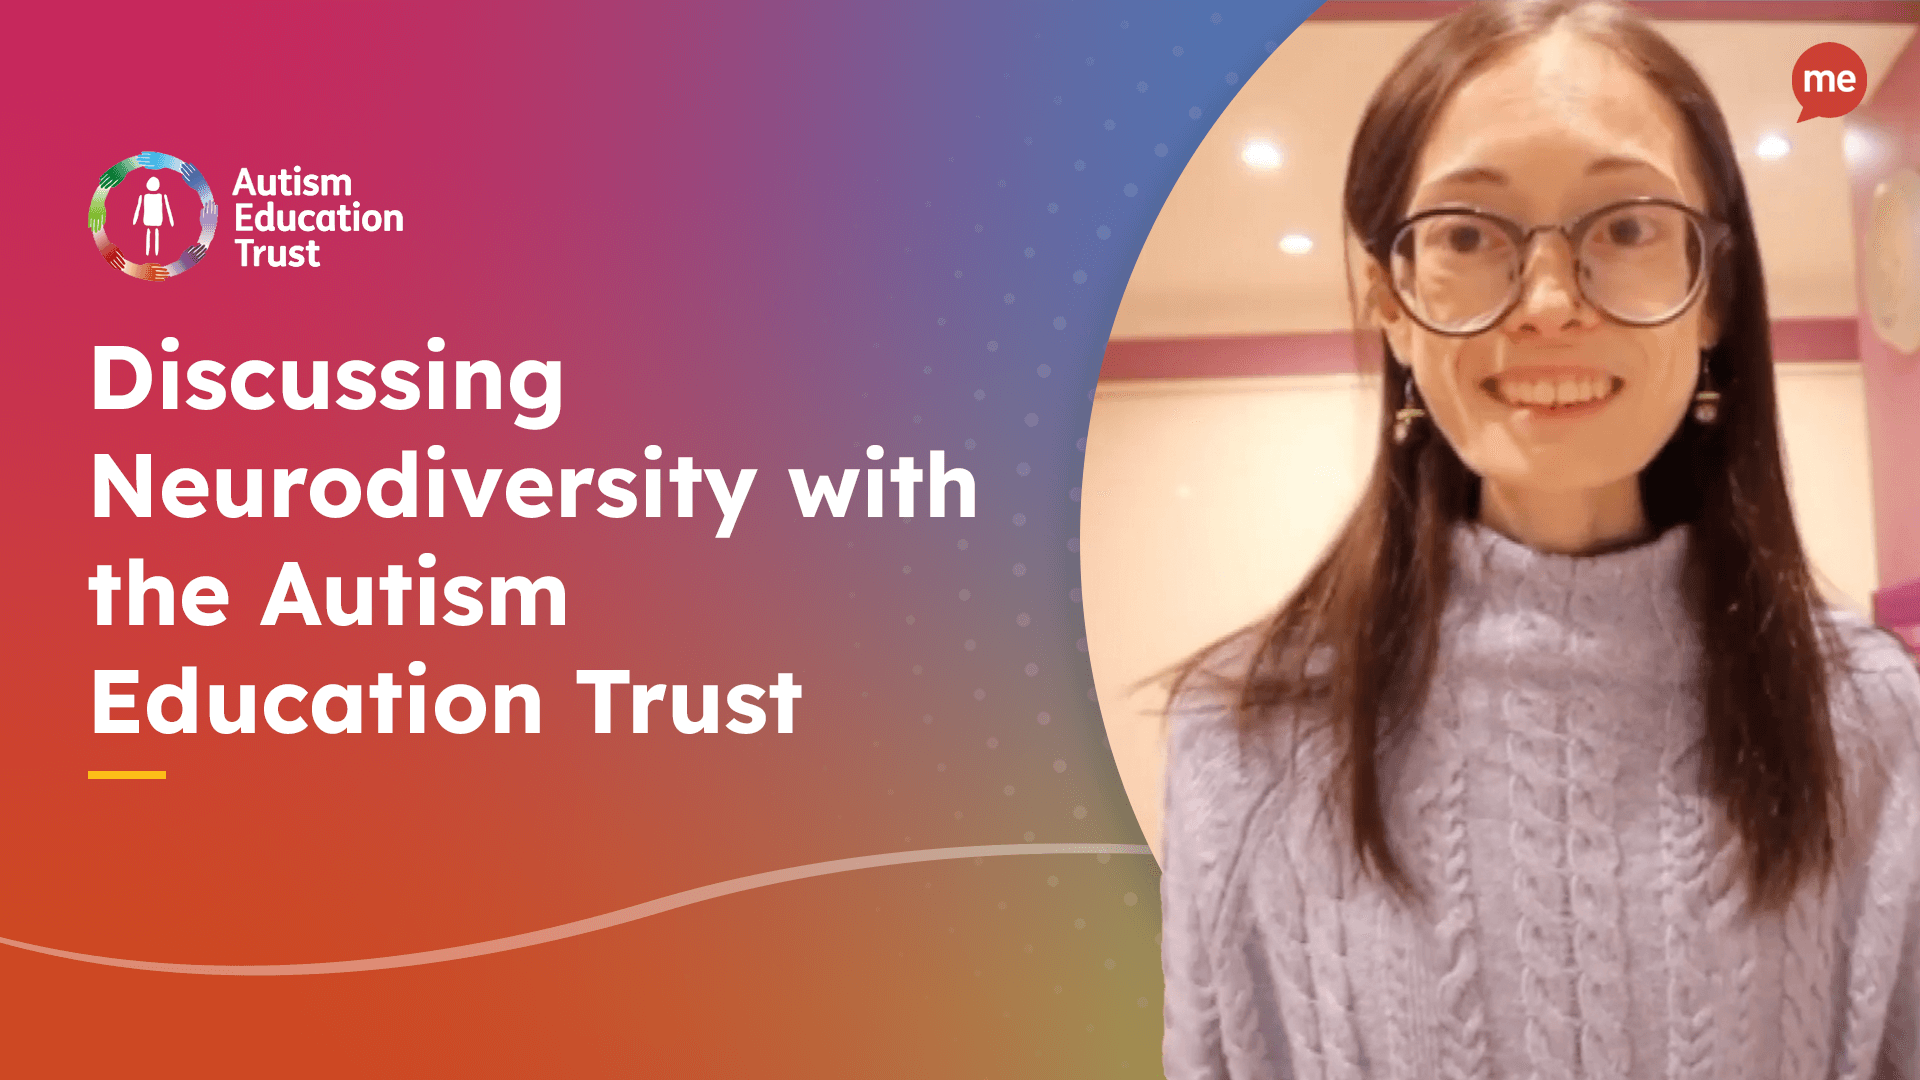 Discussing Neurodiversity with the Autism Education Trust